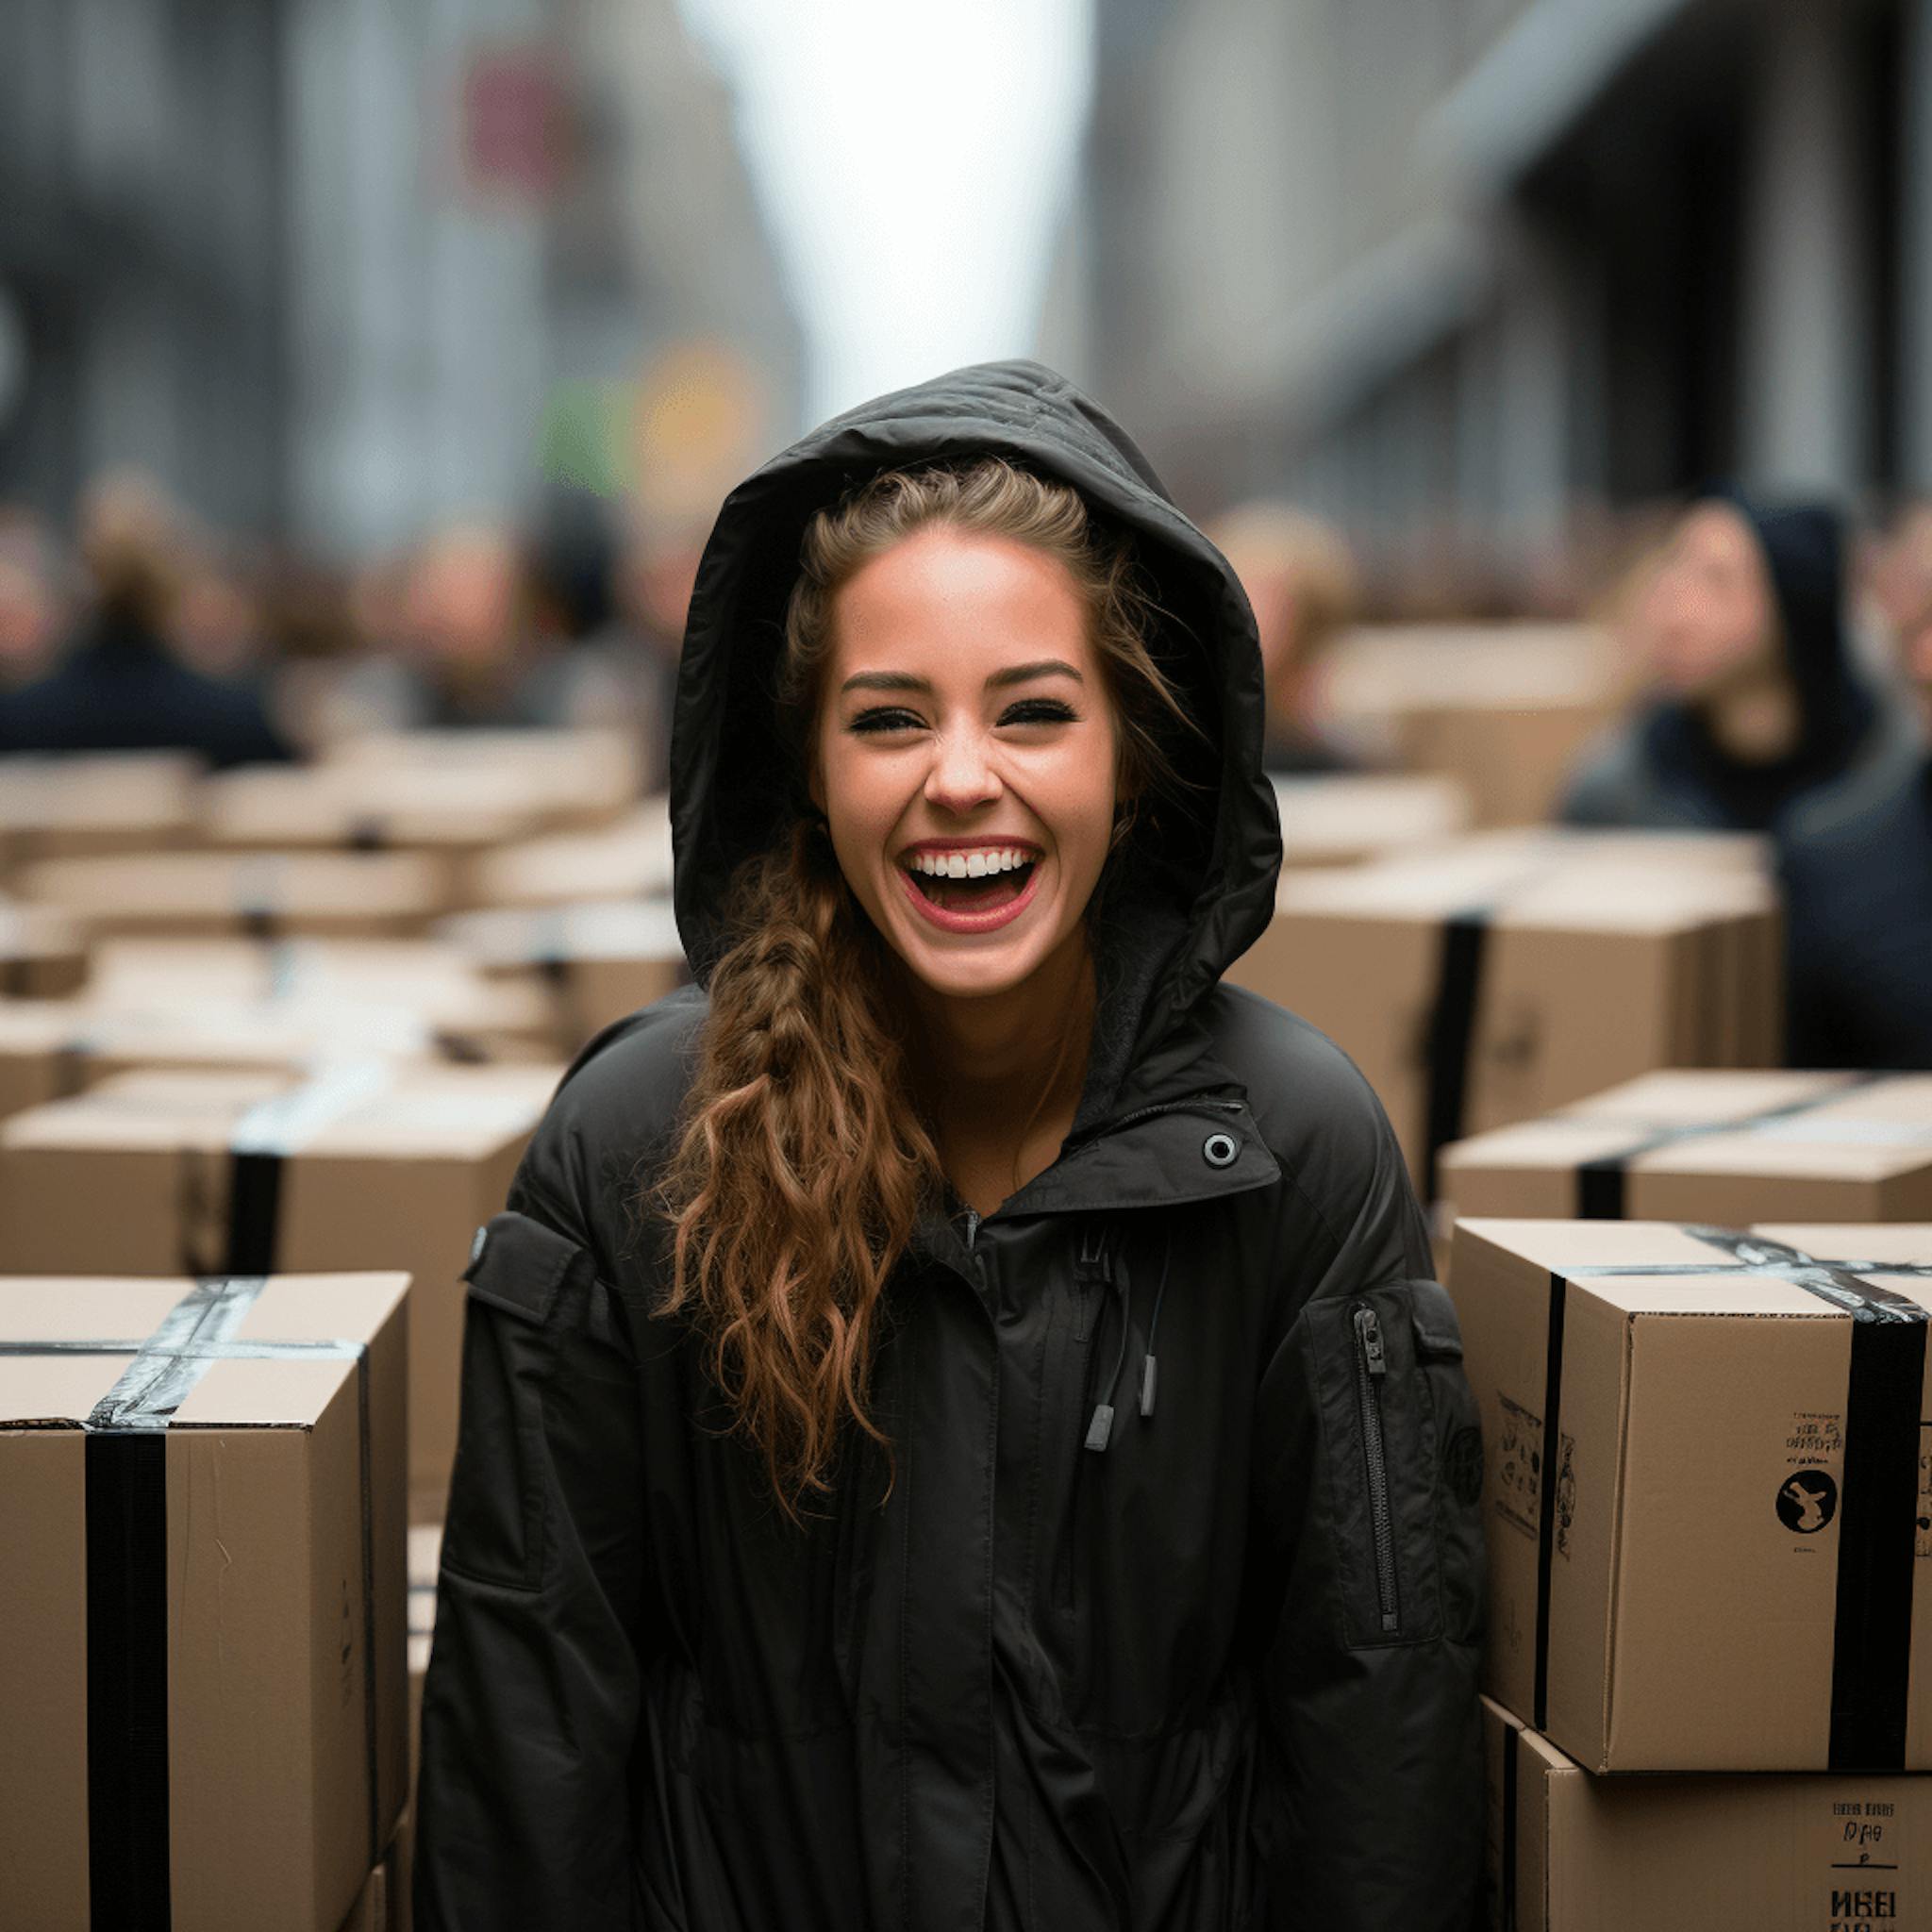 smiling woman standing near large groups of boxes